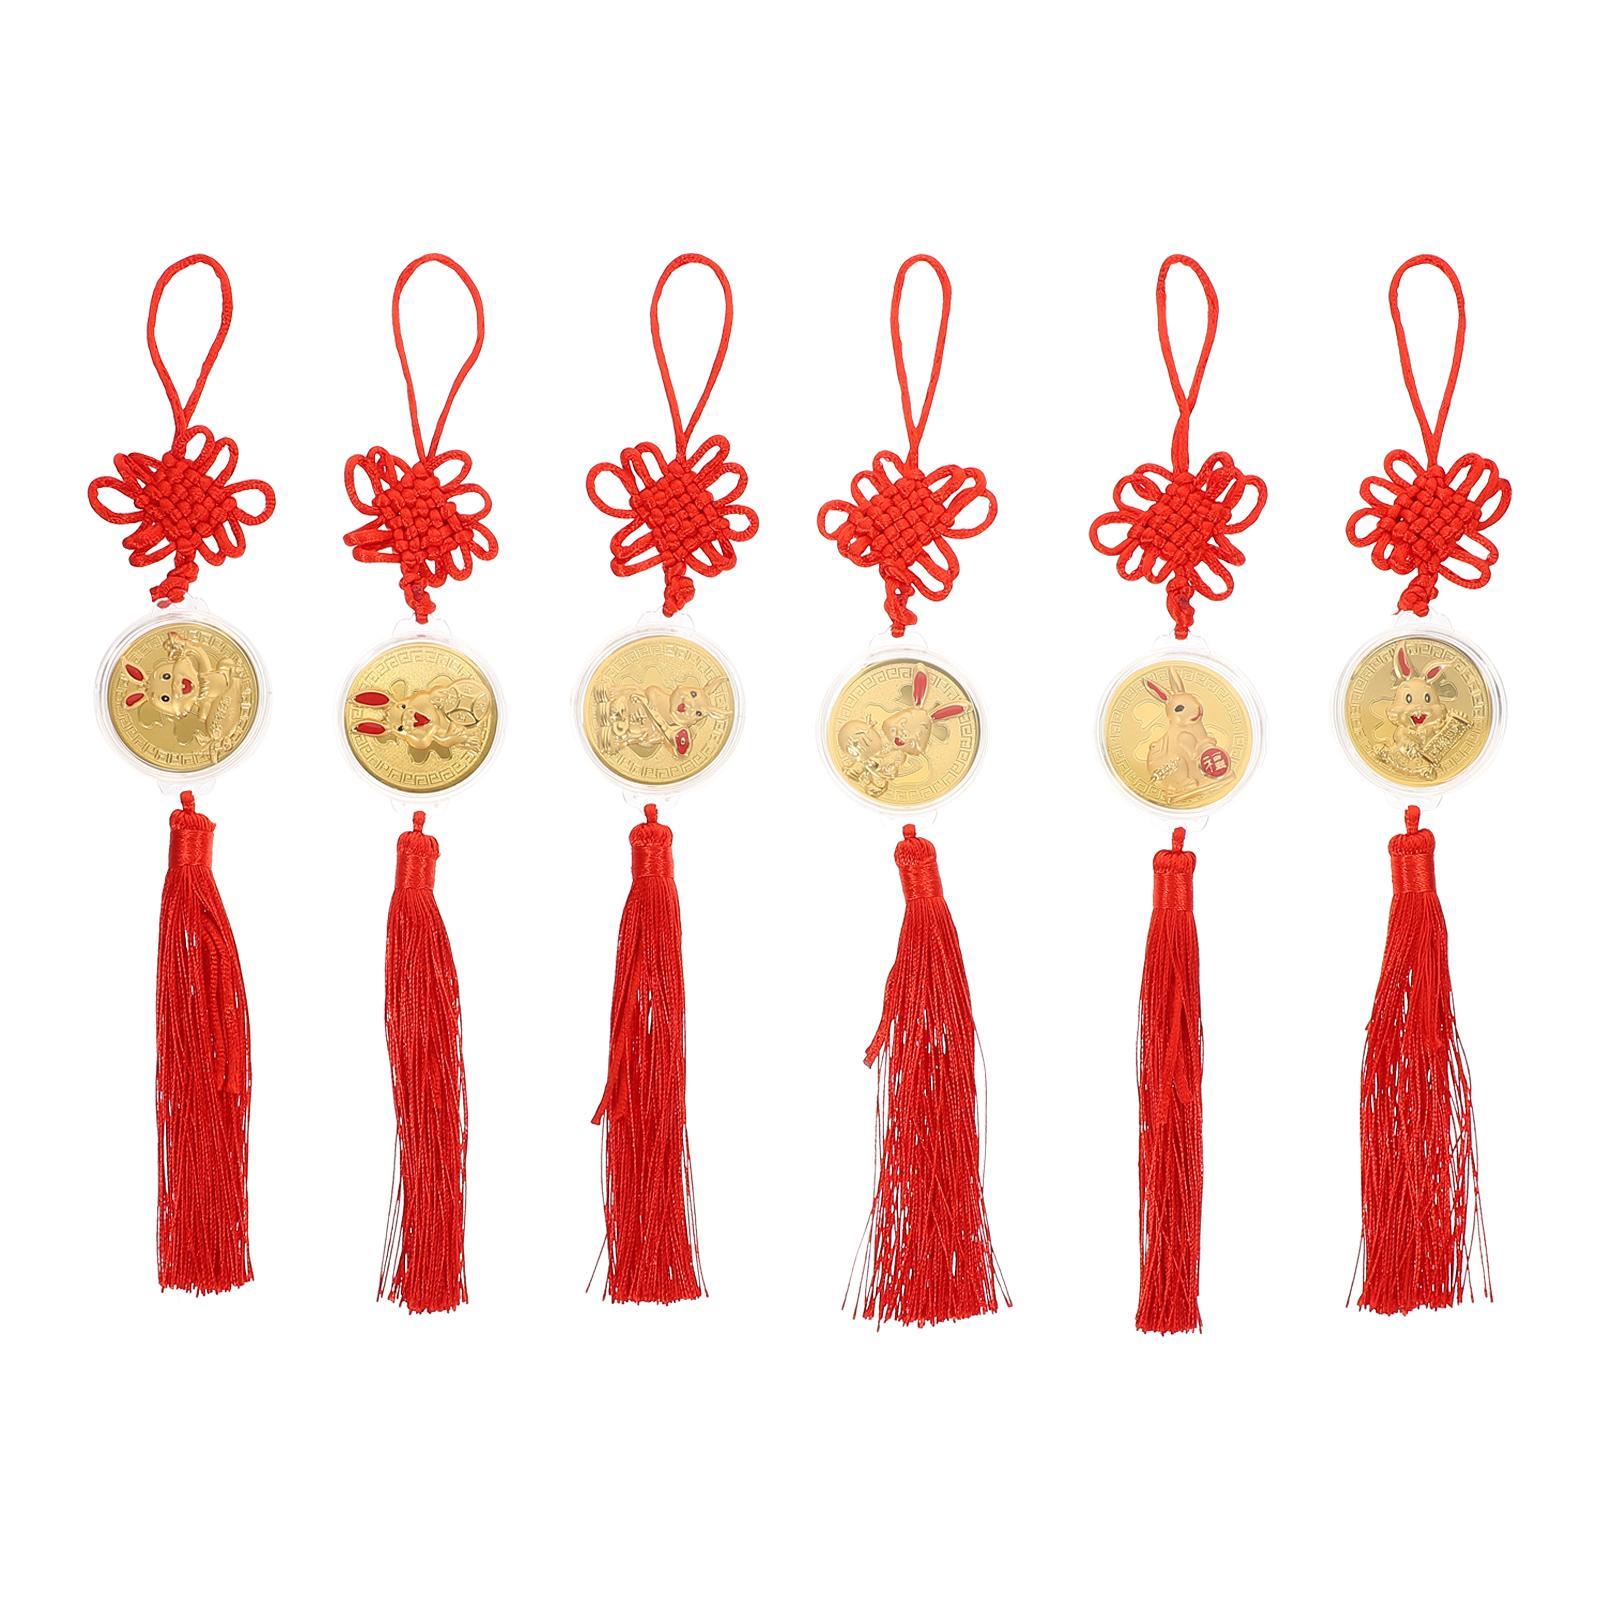 6 Pcs Year The Rabbit Pendant Chinese Knot Pendants Fortune Coins Zodiac Tassel Decorations Car Lucky Ornament Macrame Red Knots